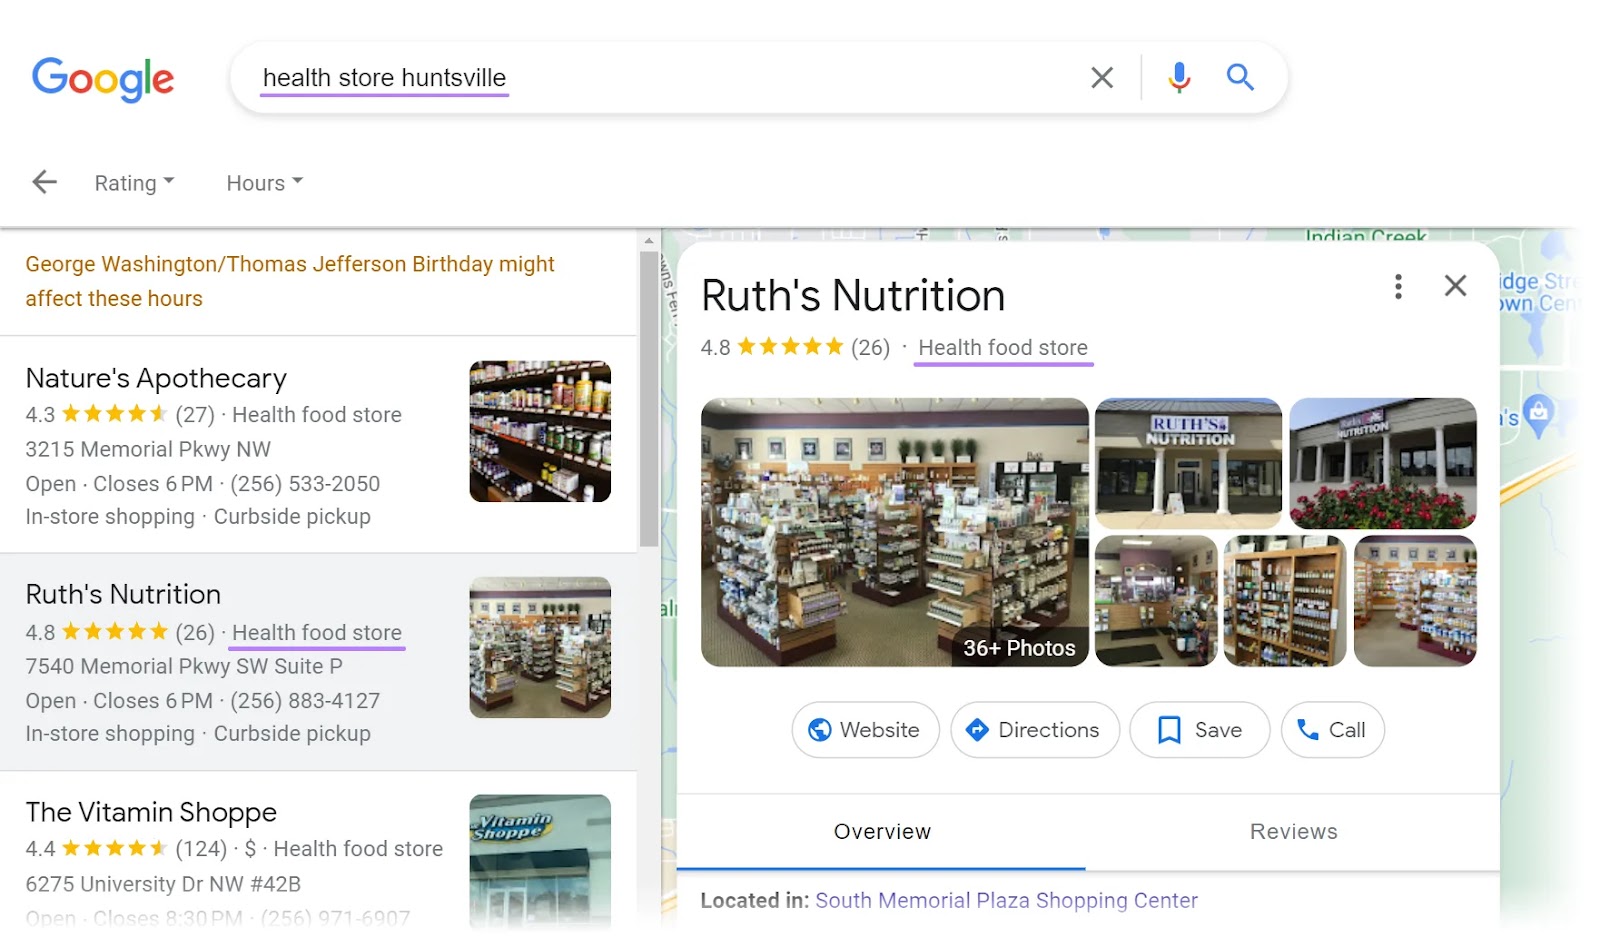 Ruth’s Nutrition’s Google Business Profile with "health nutrient  store" class  highlighted